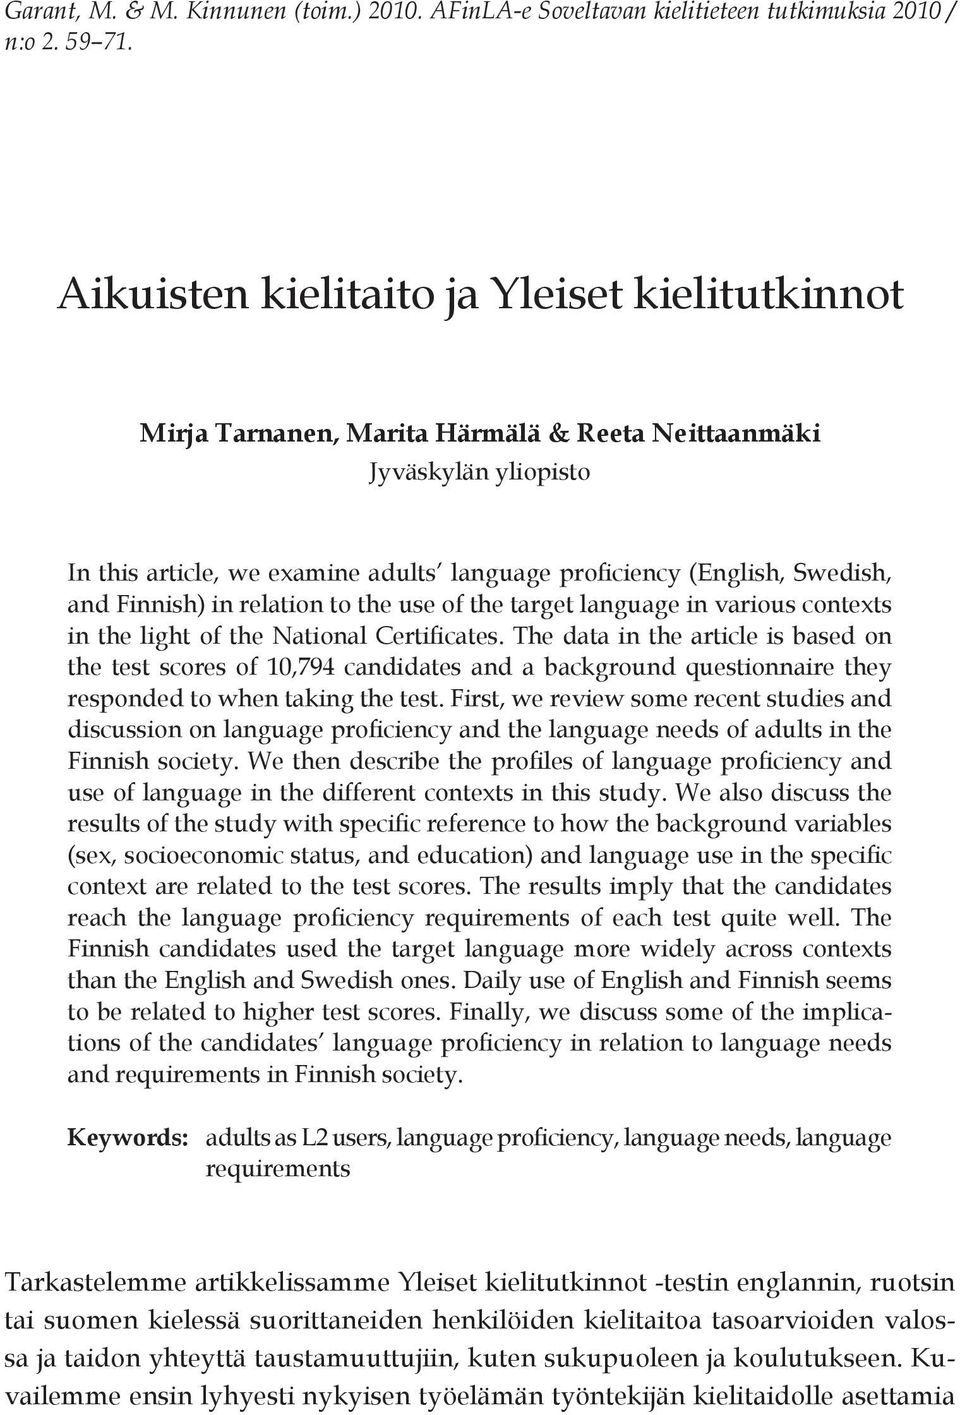 Finnish) in relation to the use of the target language in various contexts in the light of the National Certificates.